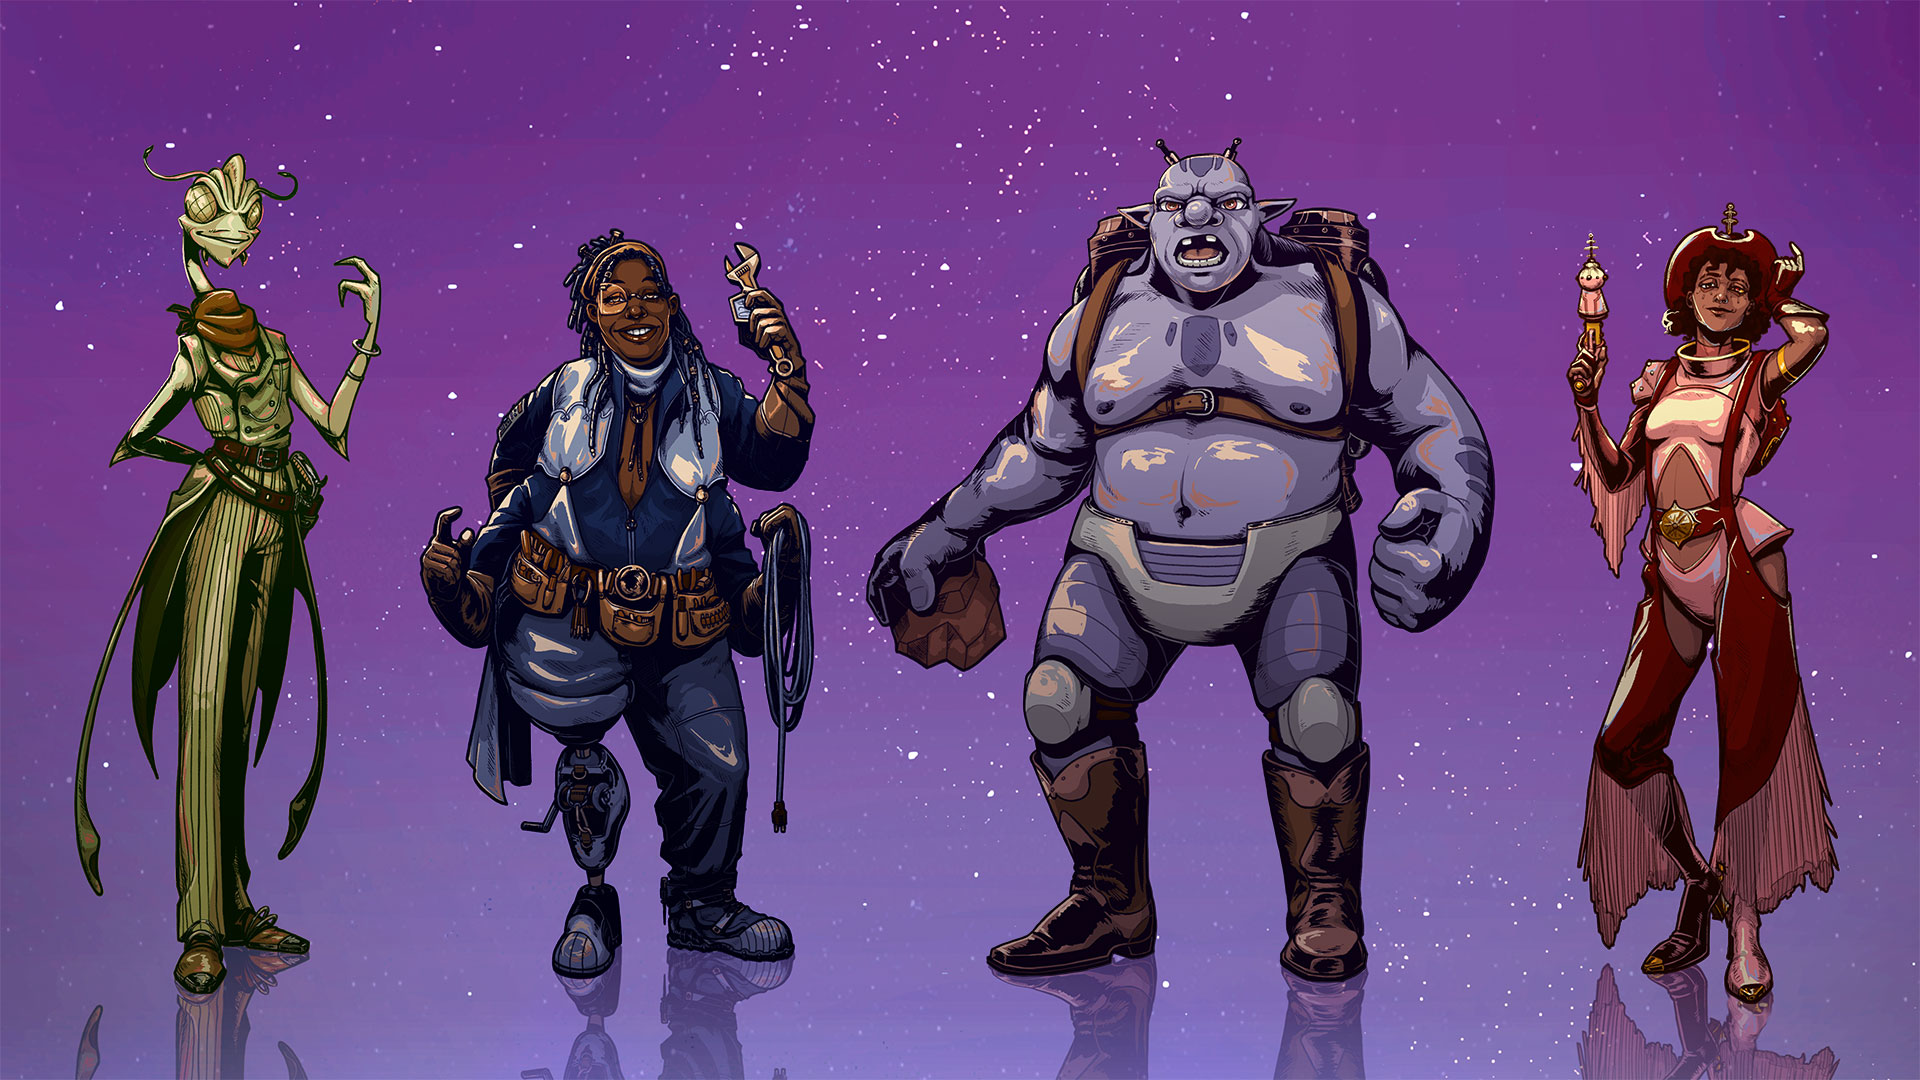 A lineup of 4 characters on a space background. The characters are rendered in comic-style: a space cowgirl, a sly insectoid, a 4-armed mechanic, and an angry troll.